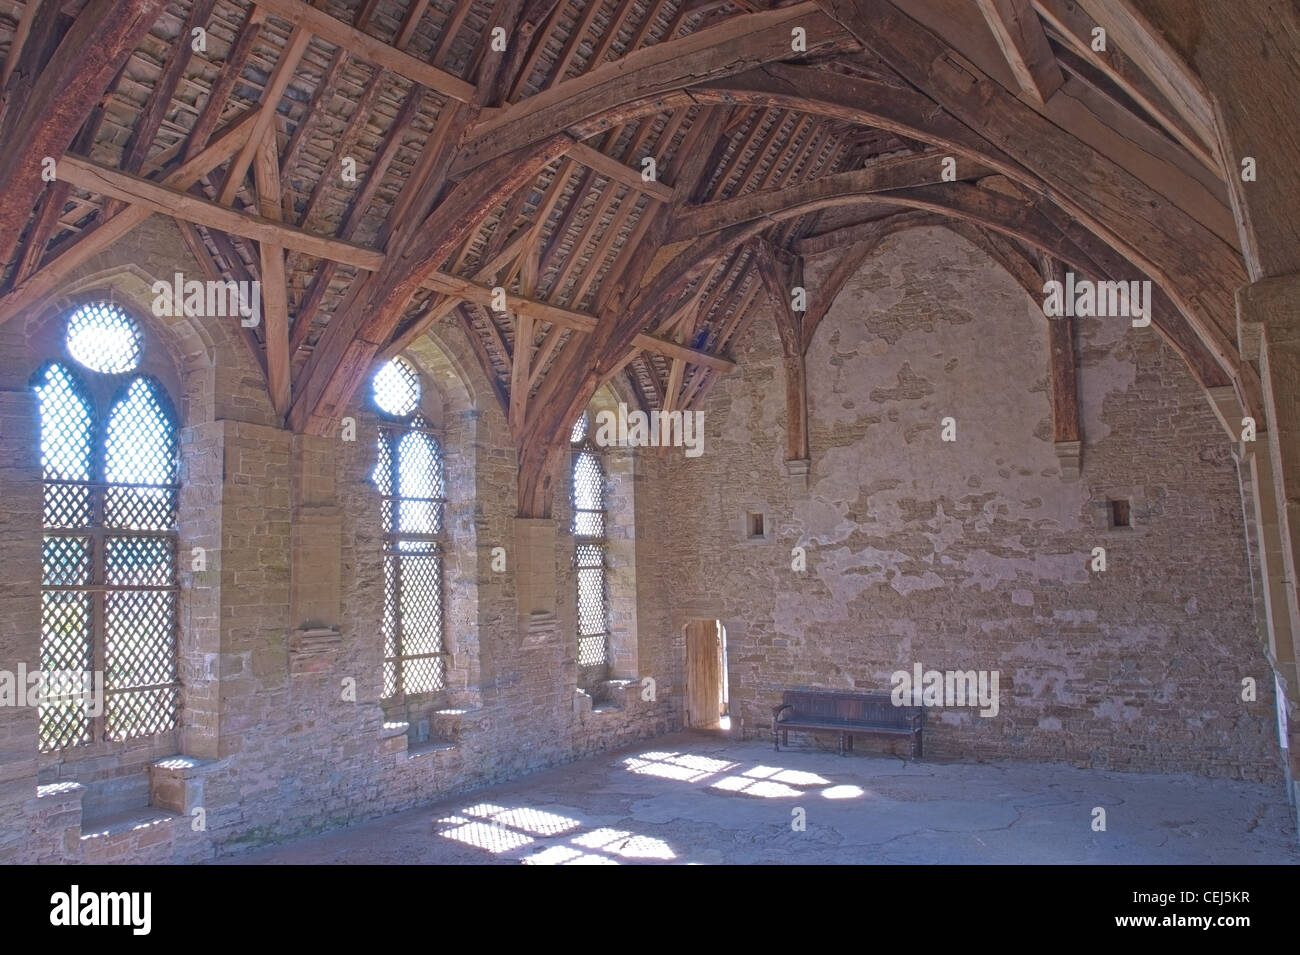 The banqueting hall at Stokesay Castle, a fortified manor house at Stokesay, Shropshire Stock Photo